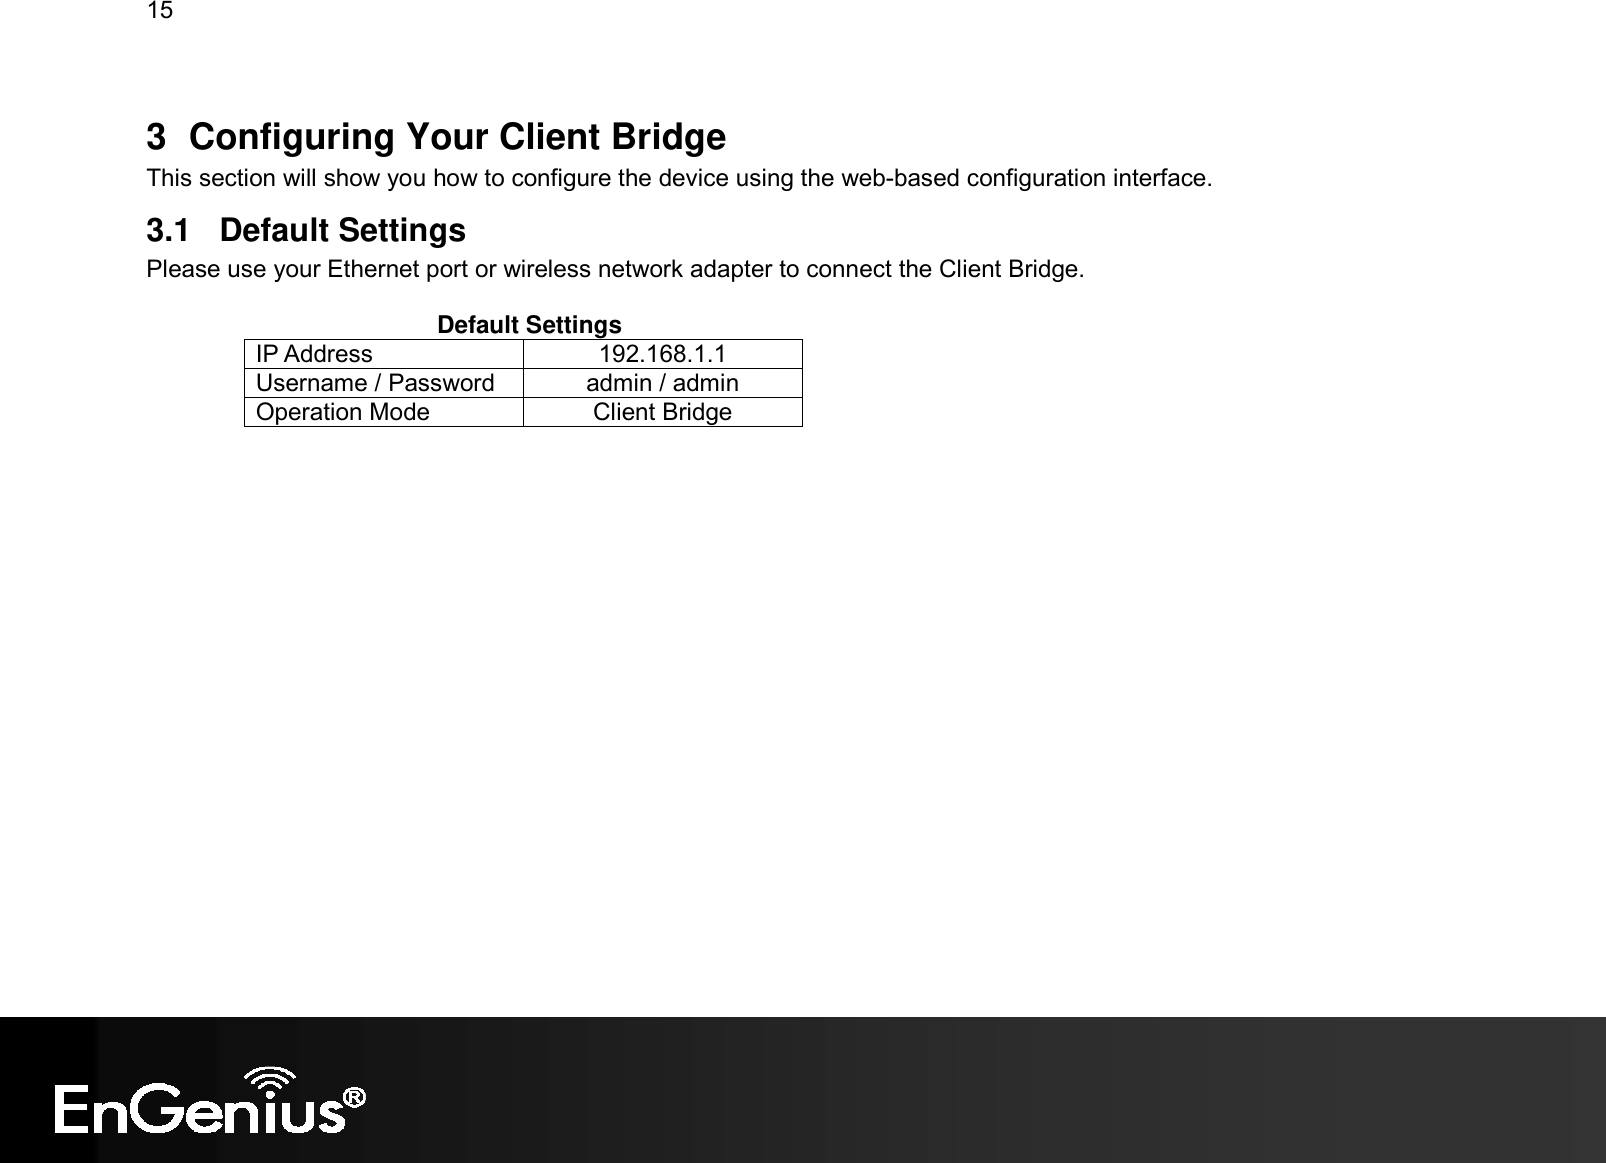 15  3  Configuring Your Client Bridge This section will show you how to configure the device using the web-based configuration interface. 3.1  Default Settings Please use your Ethernet port or wireless network adapter to connect the Client Bridge.                                             Default Settings IP Address  192.168.1.1 Username / Password  admin / admin Operation Mode  Client Bridge     